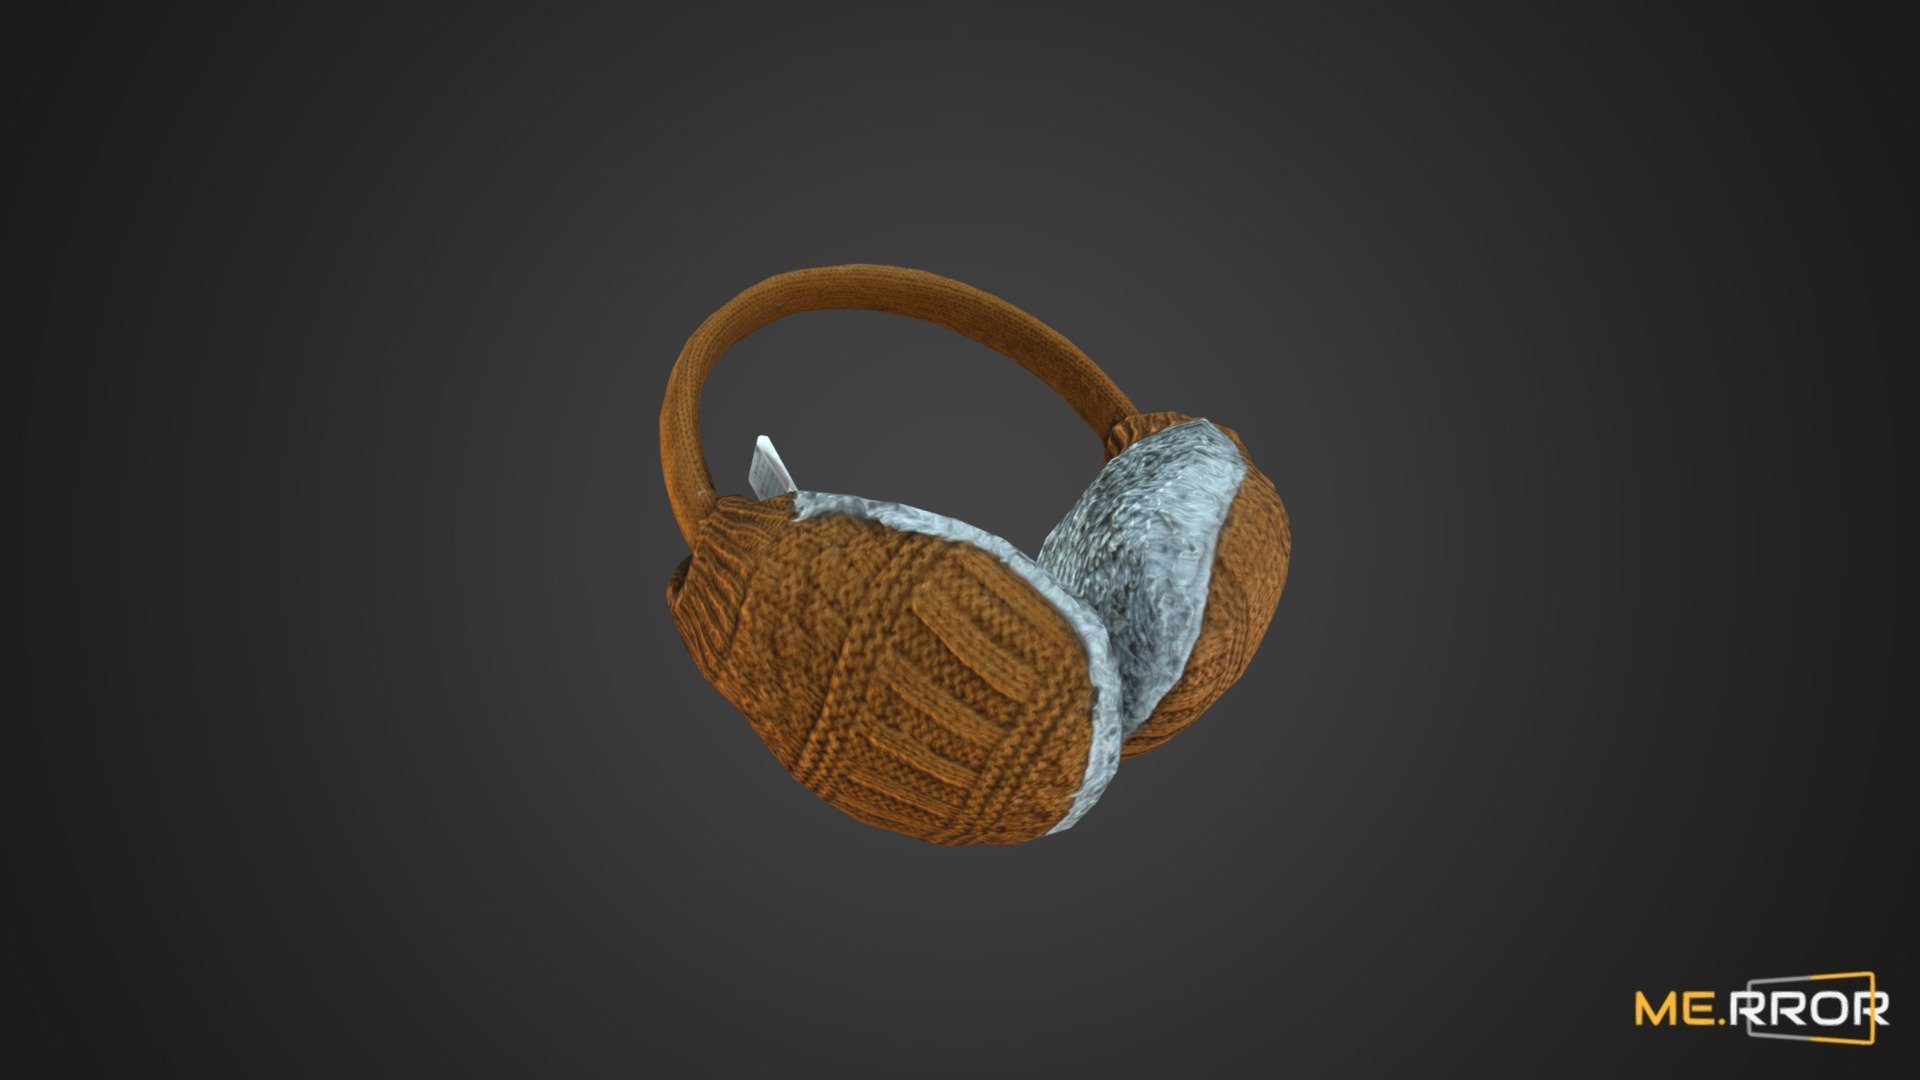 MERROR is a 3D Content PLATFORM which introduces various Asian assets to the 3D world


3DScanning #Photogrametry #ME.RROR - [Game-Ready] Earmuffs - Buy Royalty Free 3D model by ME.RROR (@merror) 3d model